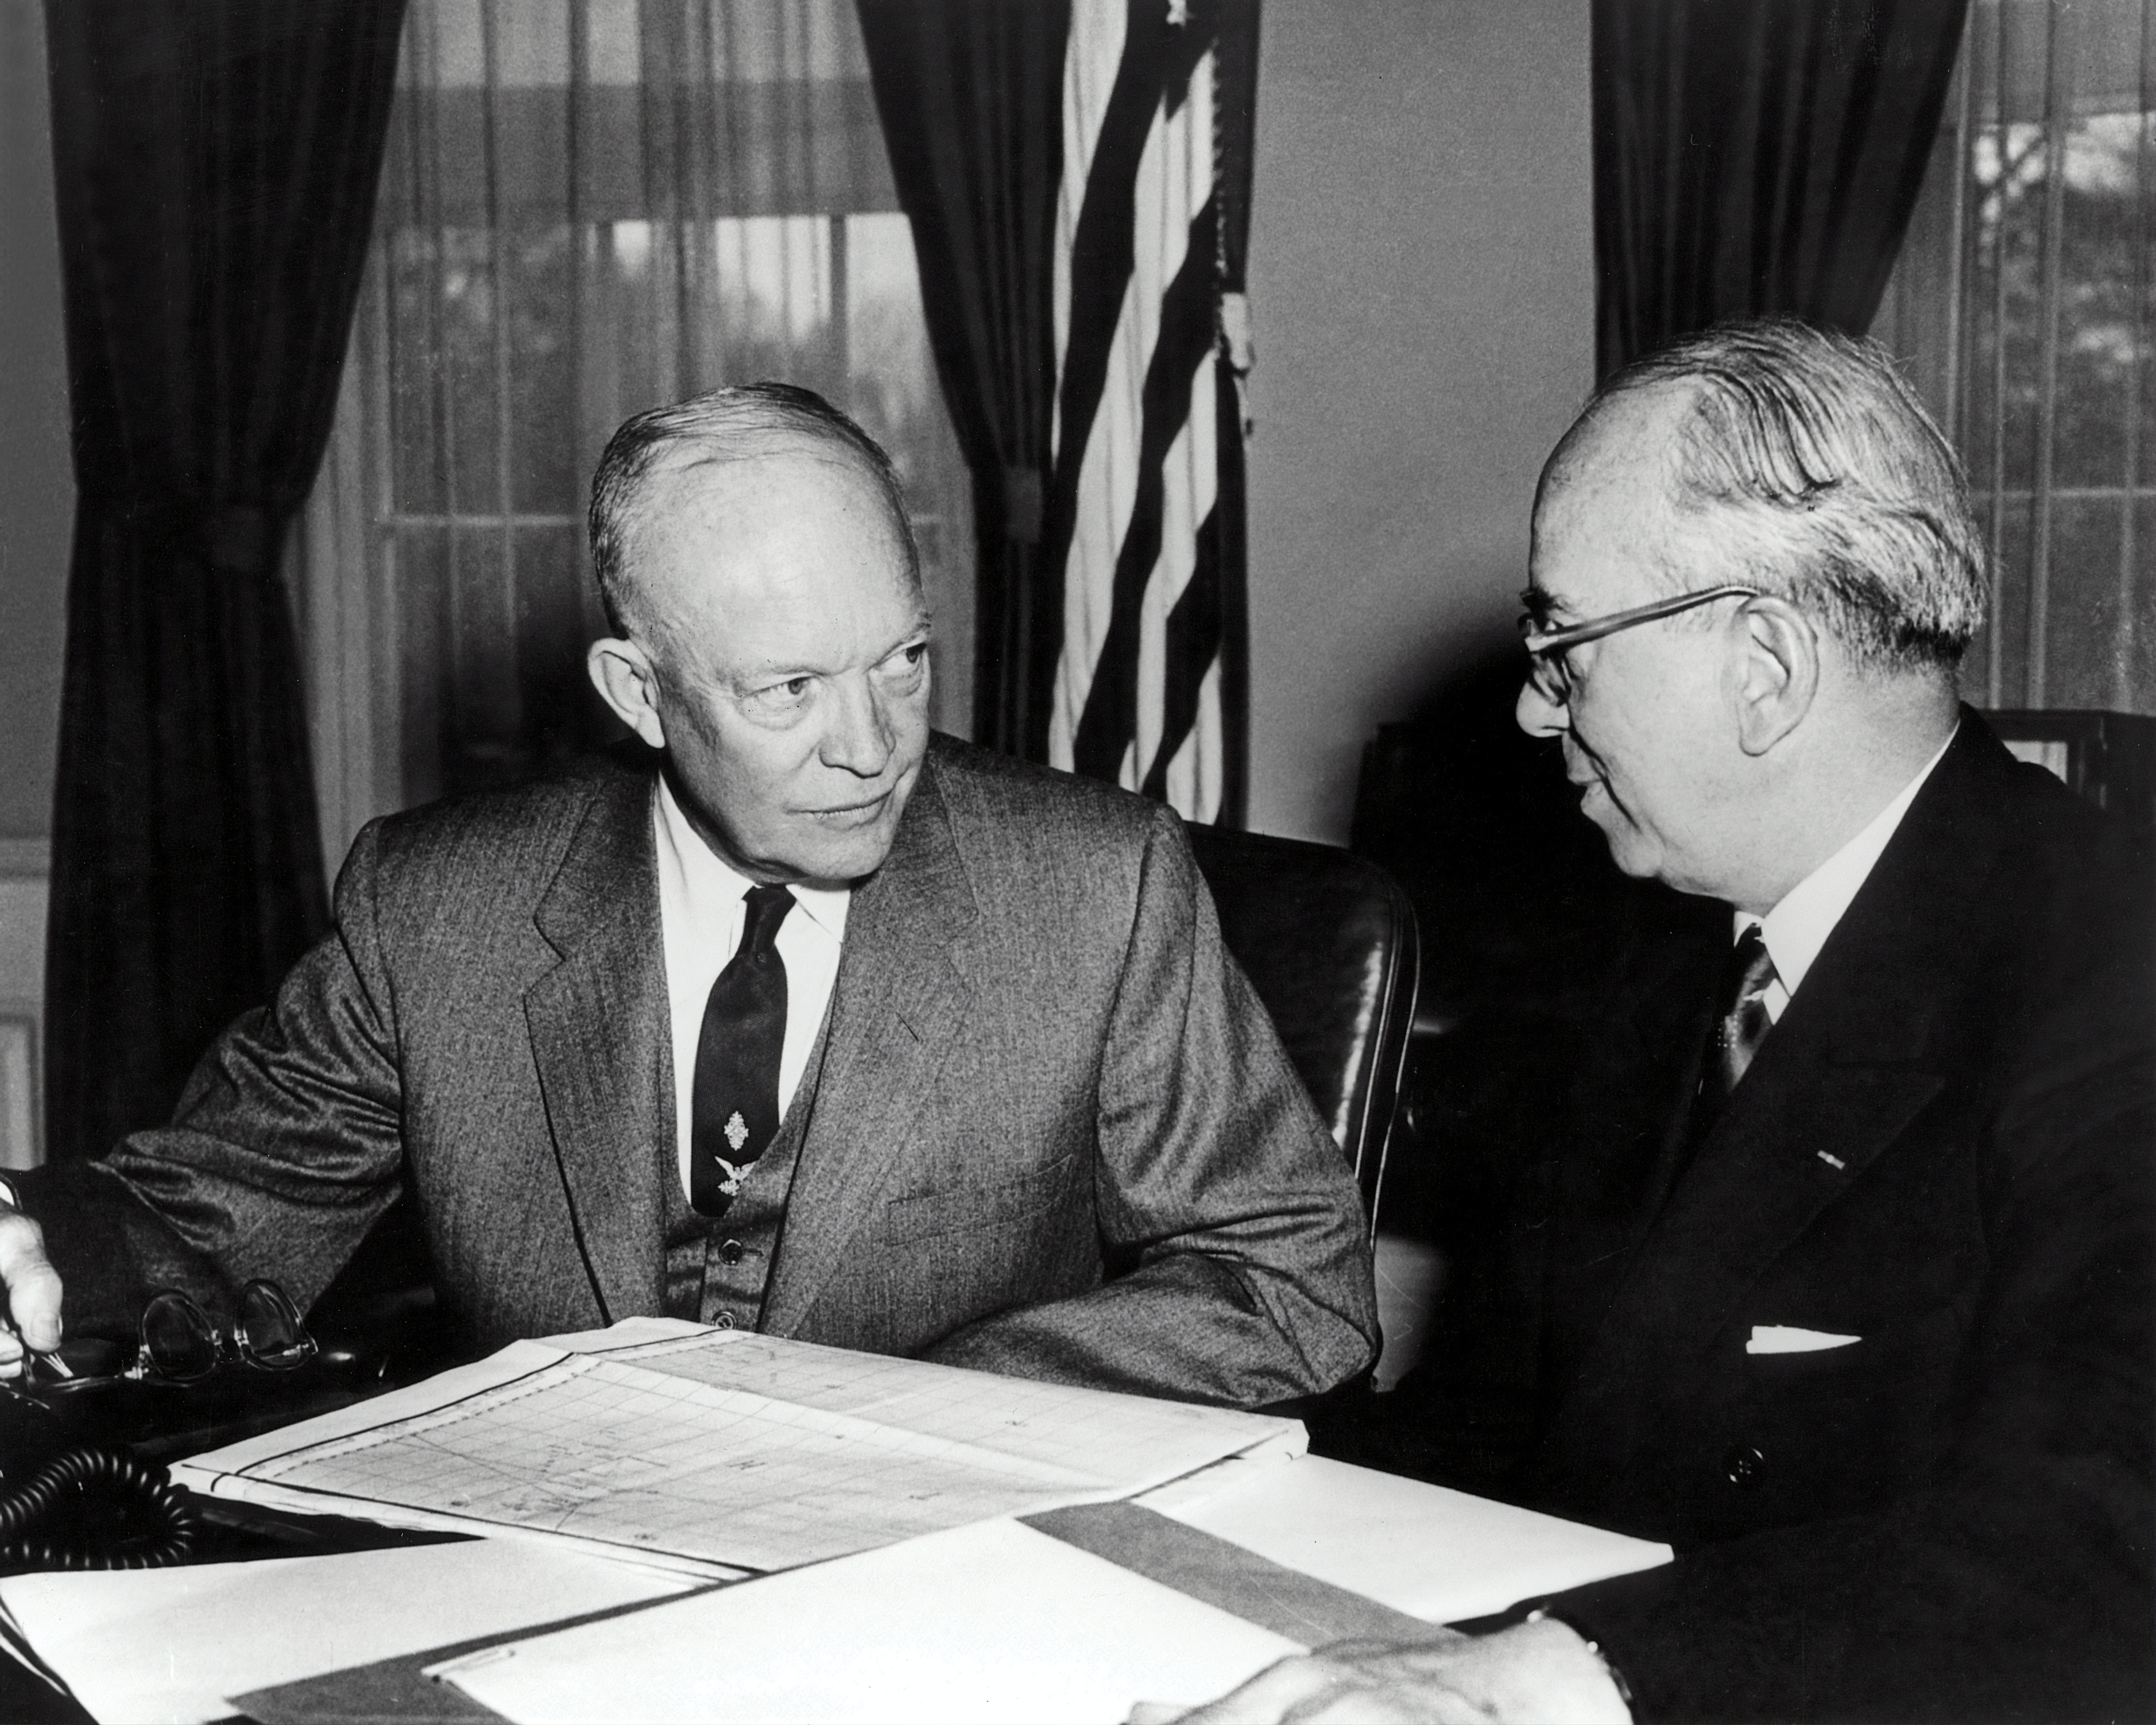 President Dwight D. Eisenhower receives a report from Lewis Strauss on Hydrogen Bomb tests in the Pacific, March 30, 1954.